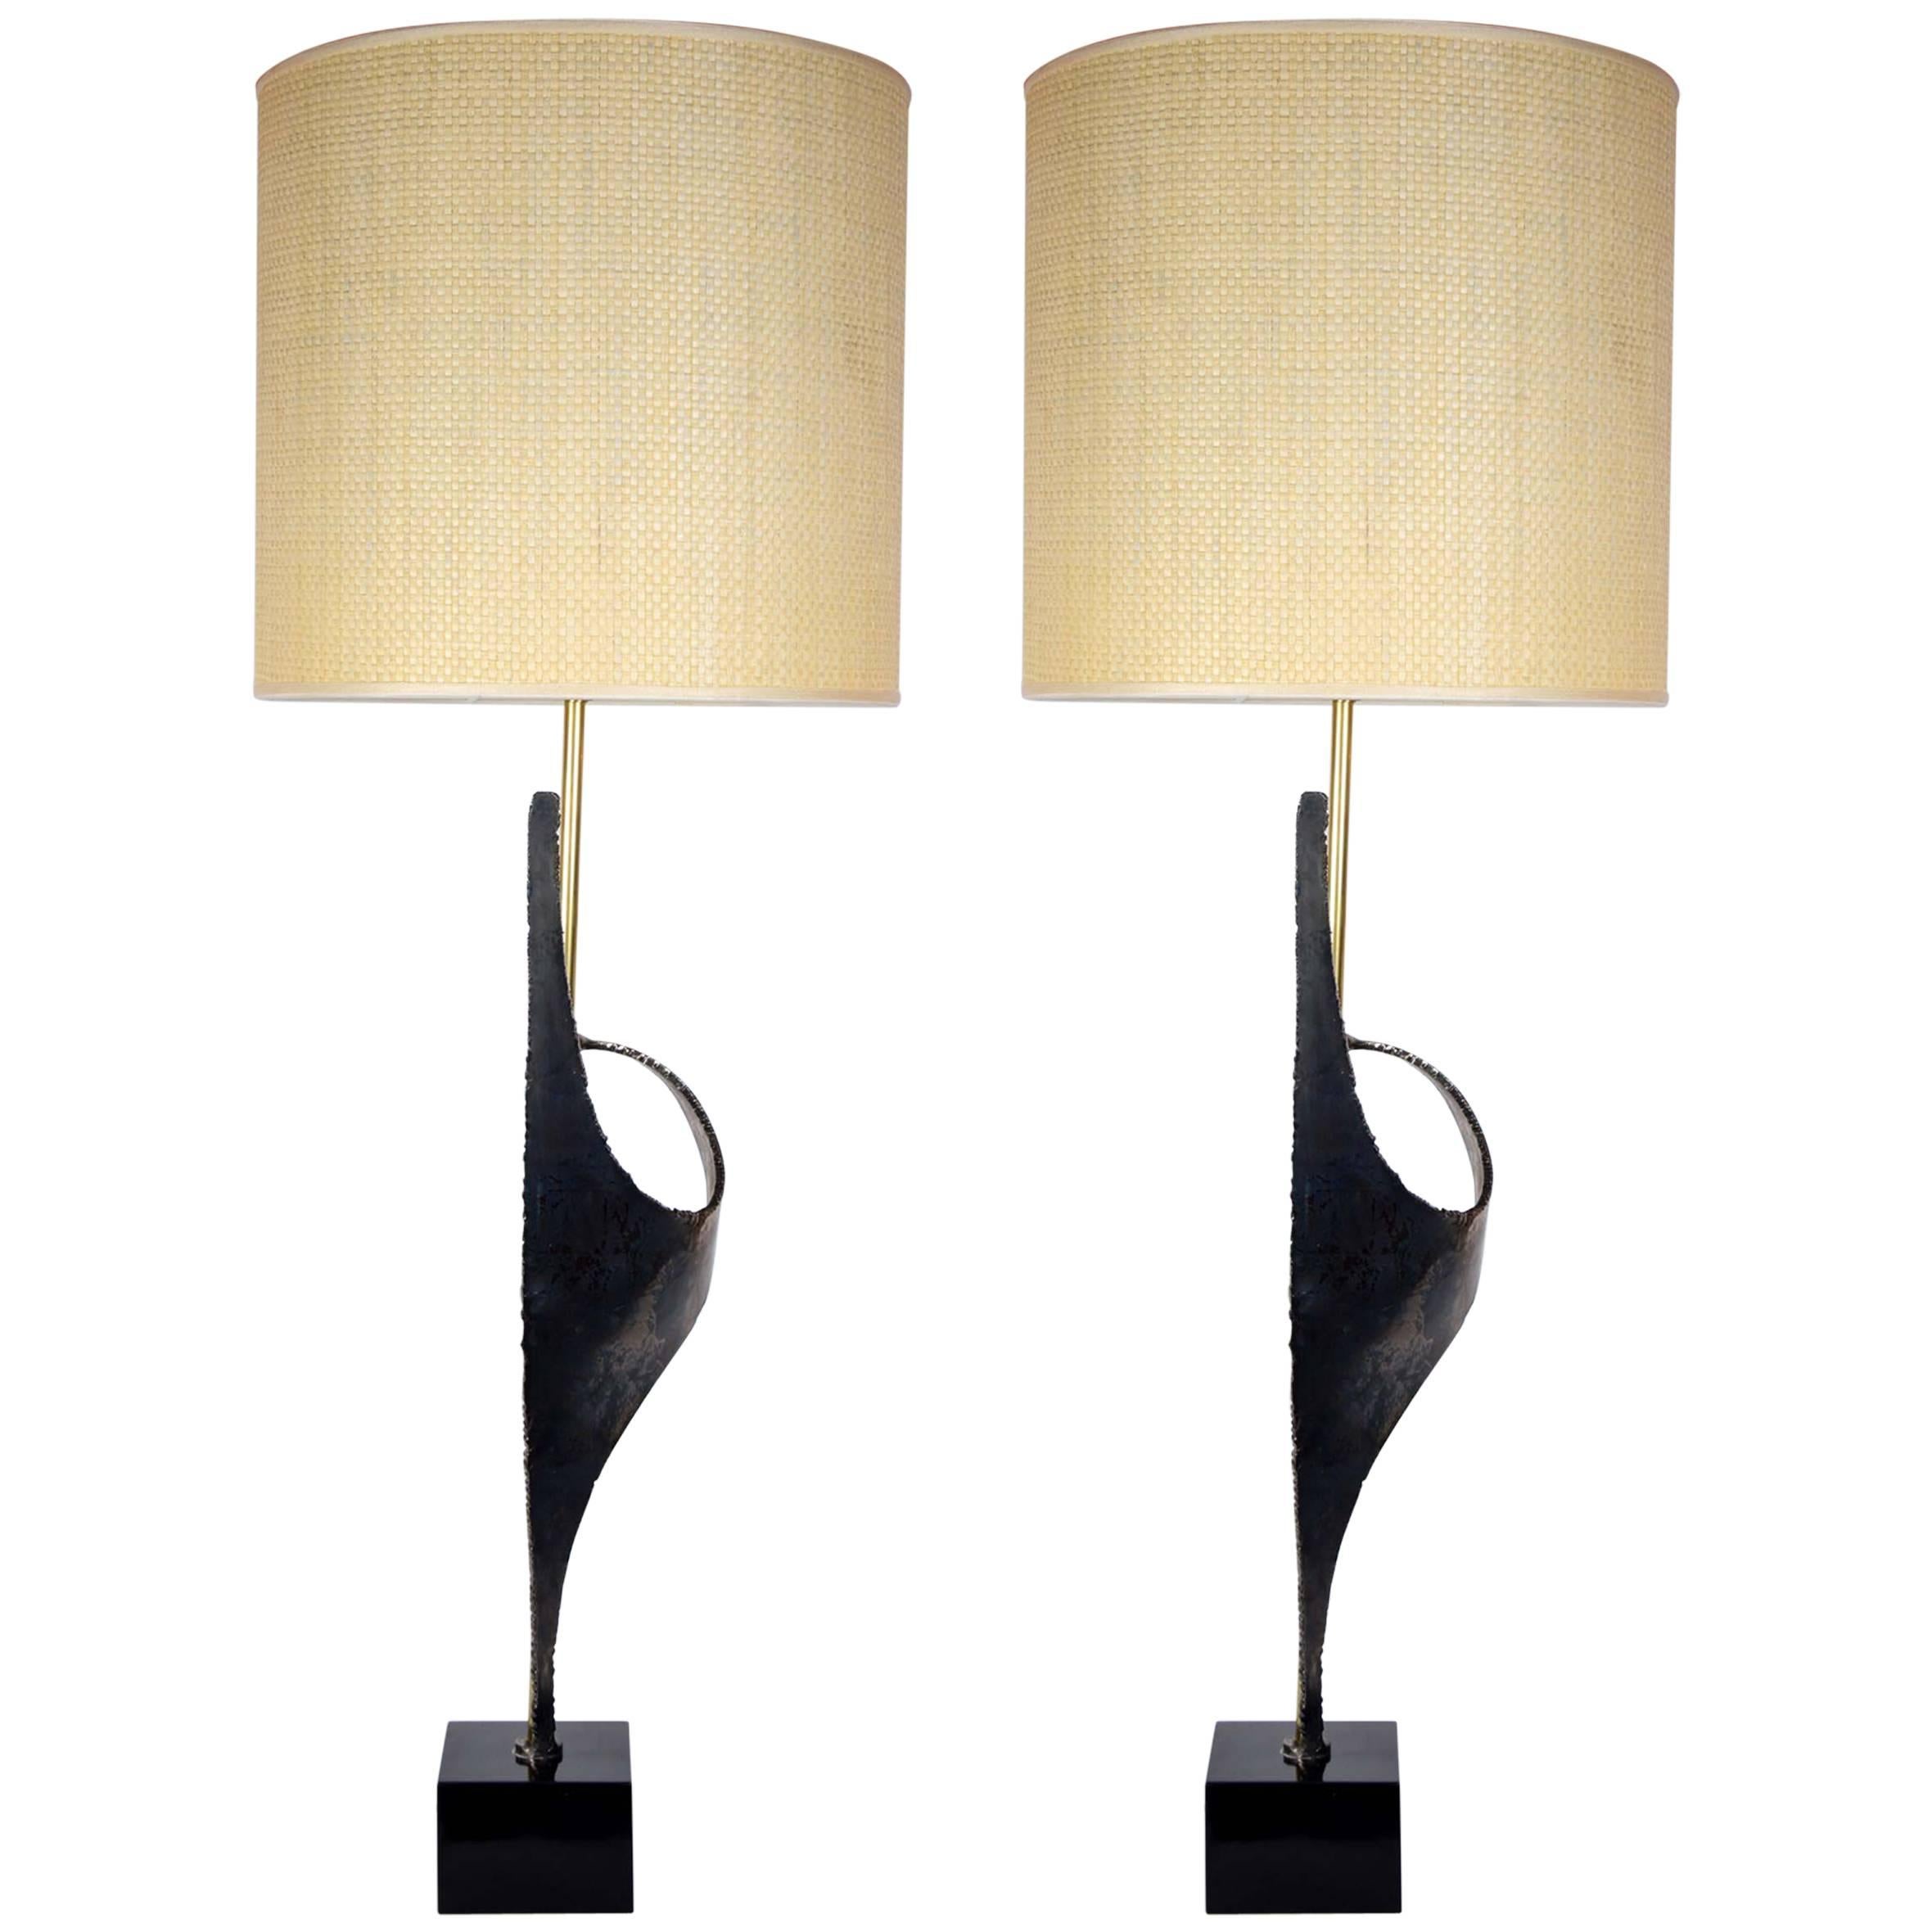 Pair of Brutalist Lamps in the Style of Curtis Jere